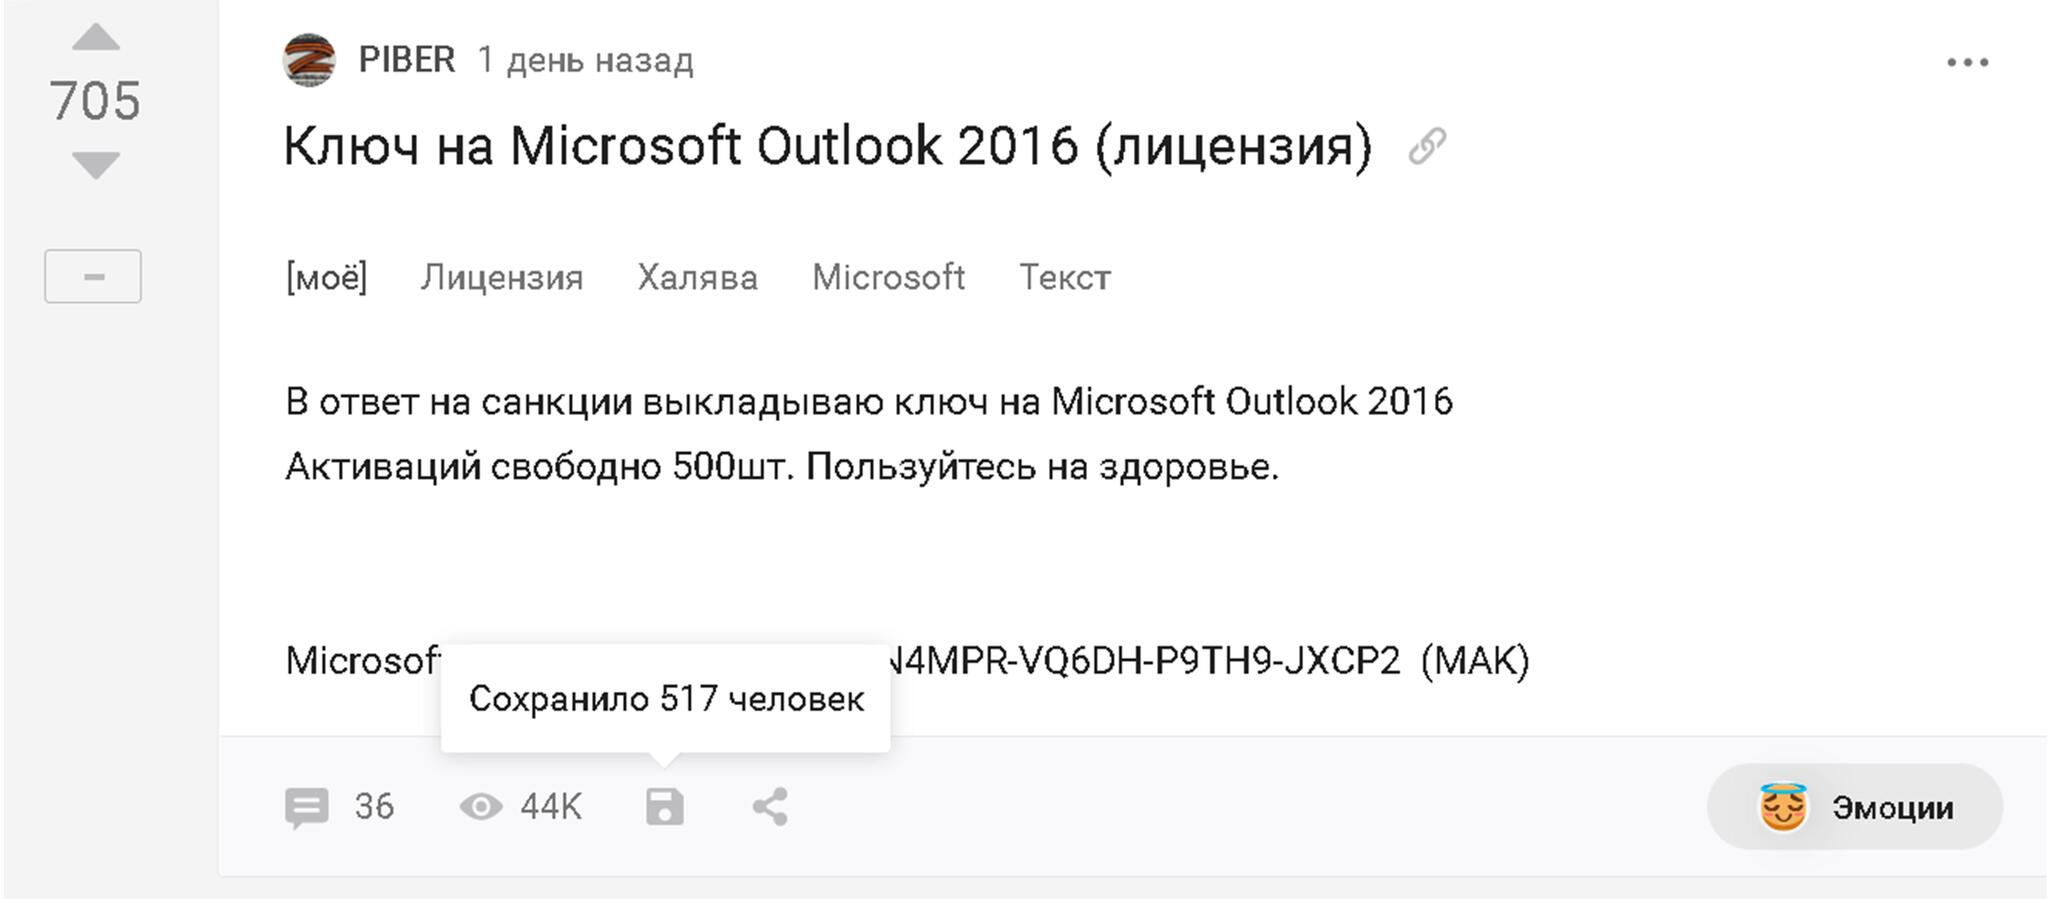 Answer to the post Key for Microsoft Outlook 2016 (license) - License, Freebie, Microsoft, Text, Reply to post